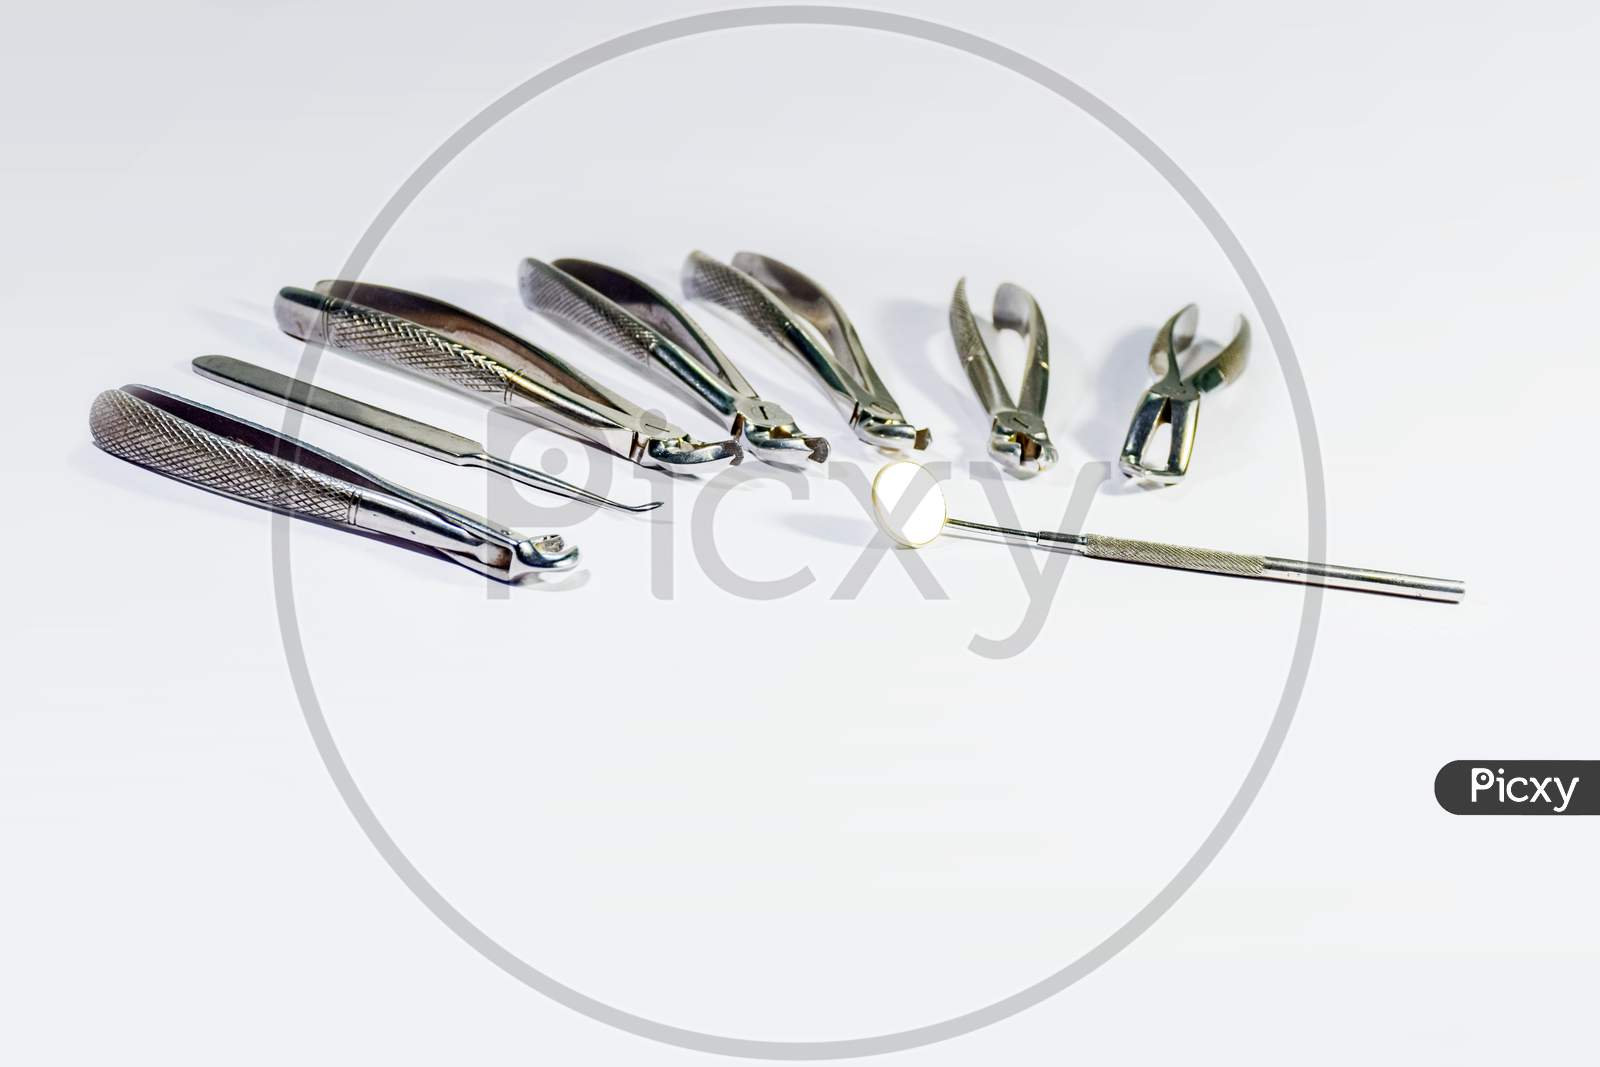 Dental Instruments Arranged On White Table.